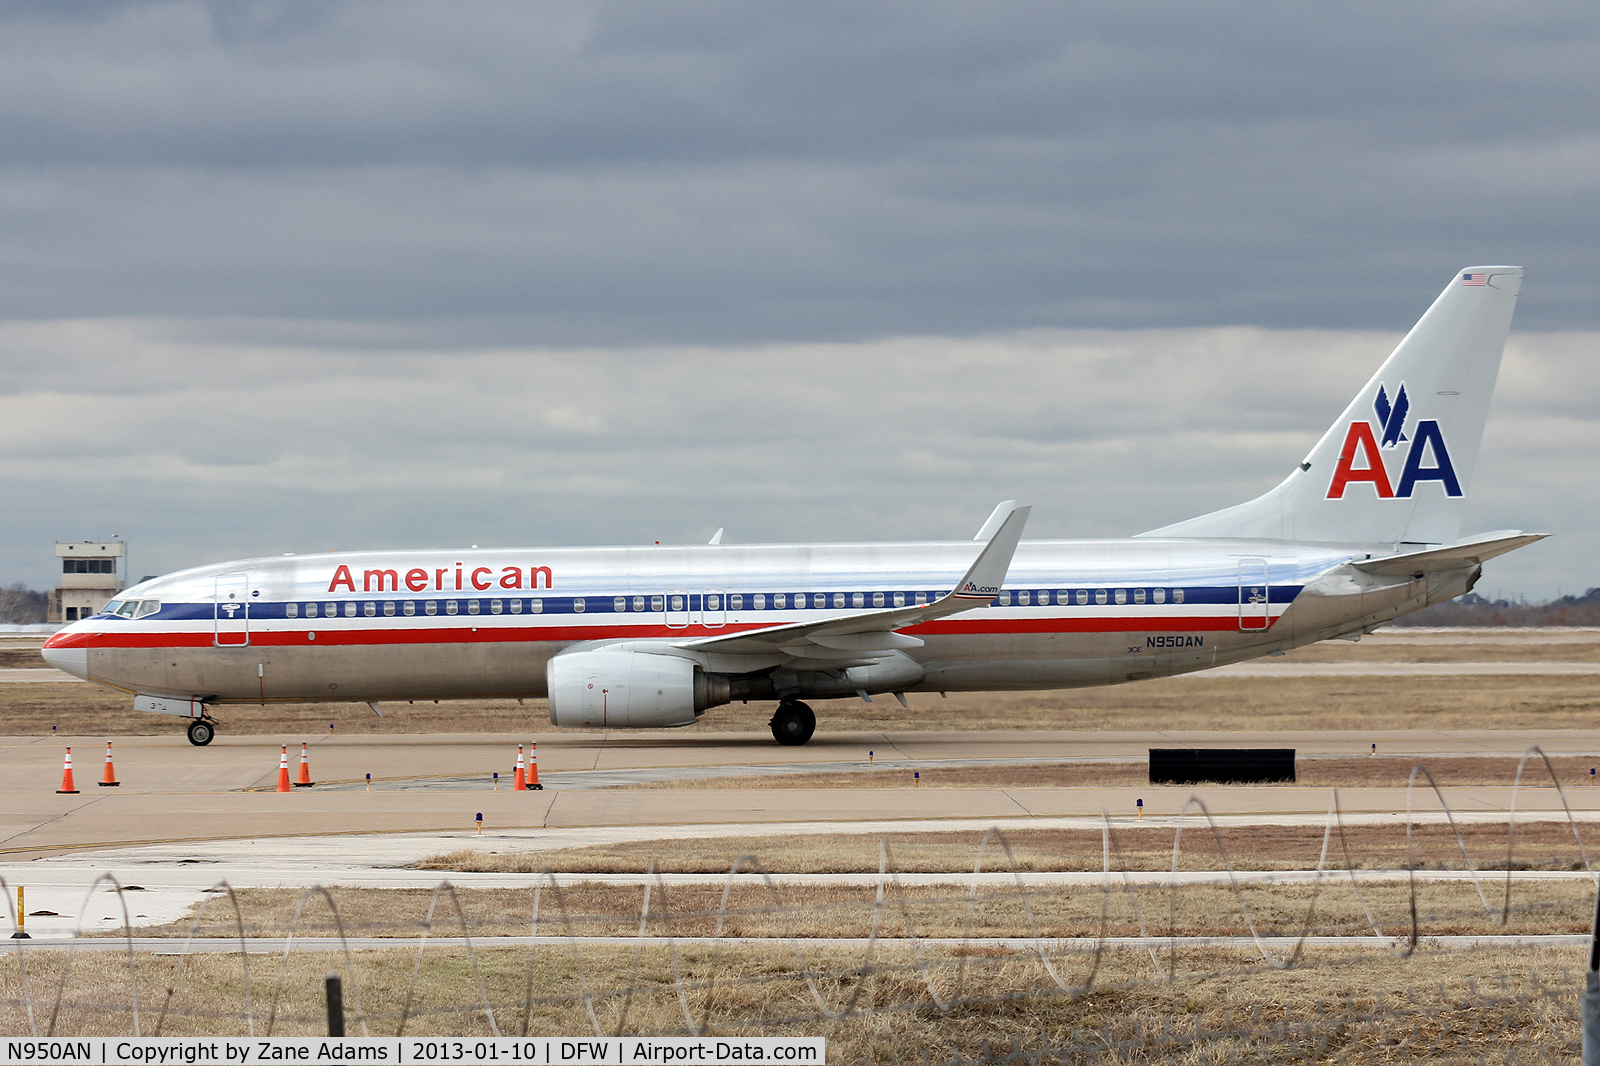 N950AN, 2000 Boeing 737-823 C/N 30087, American Airlines at DFW Airport